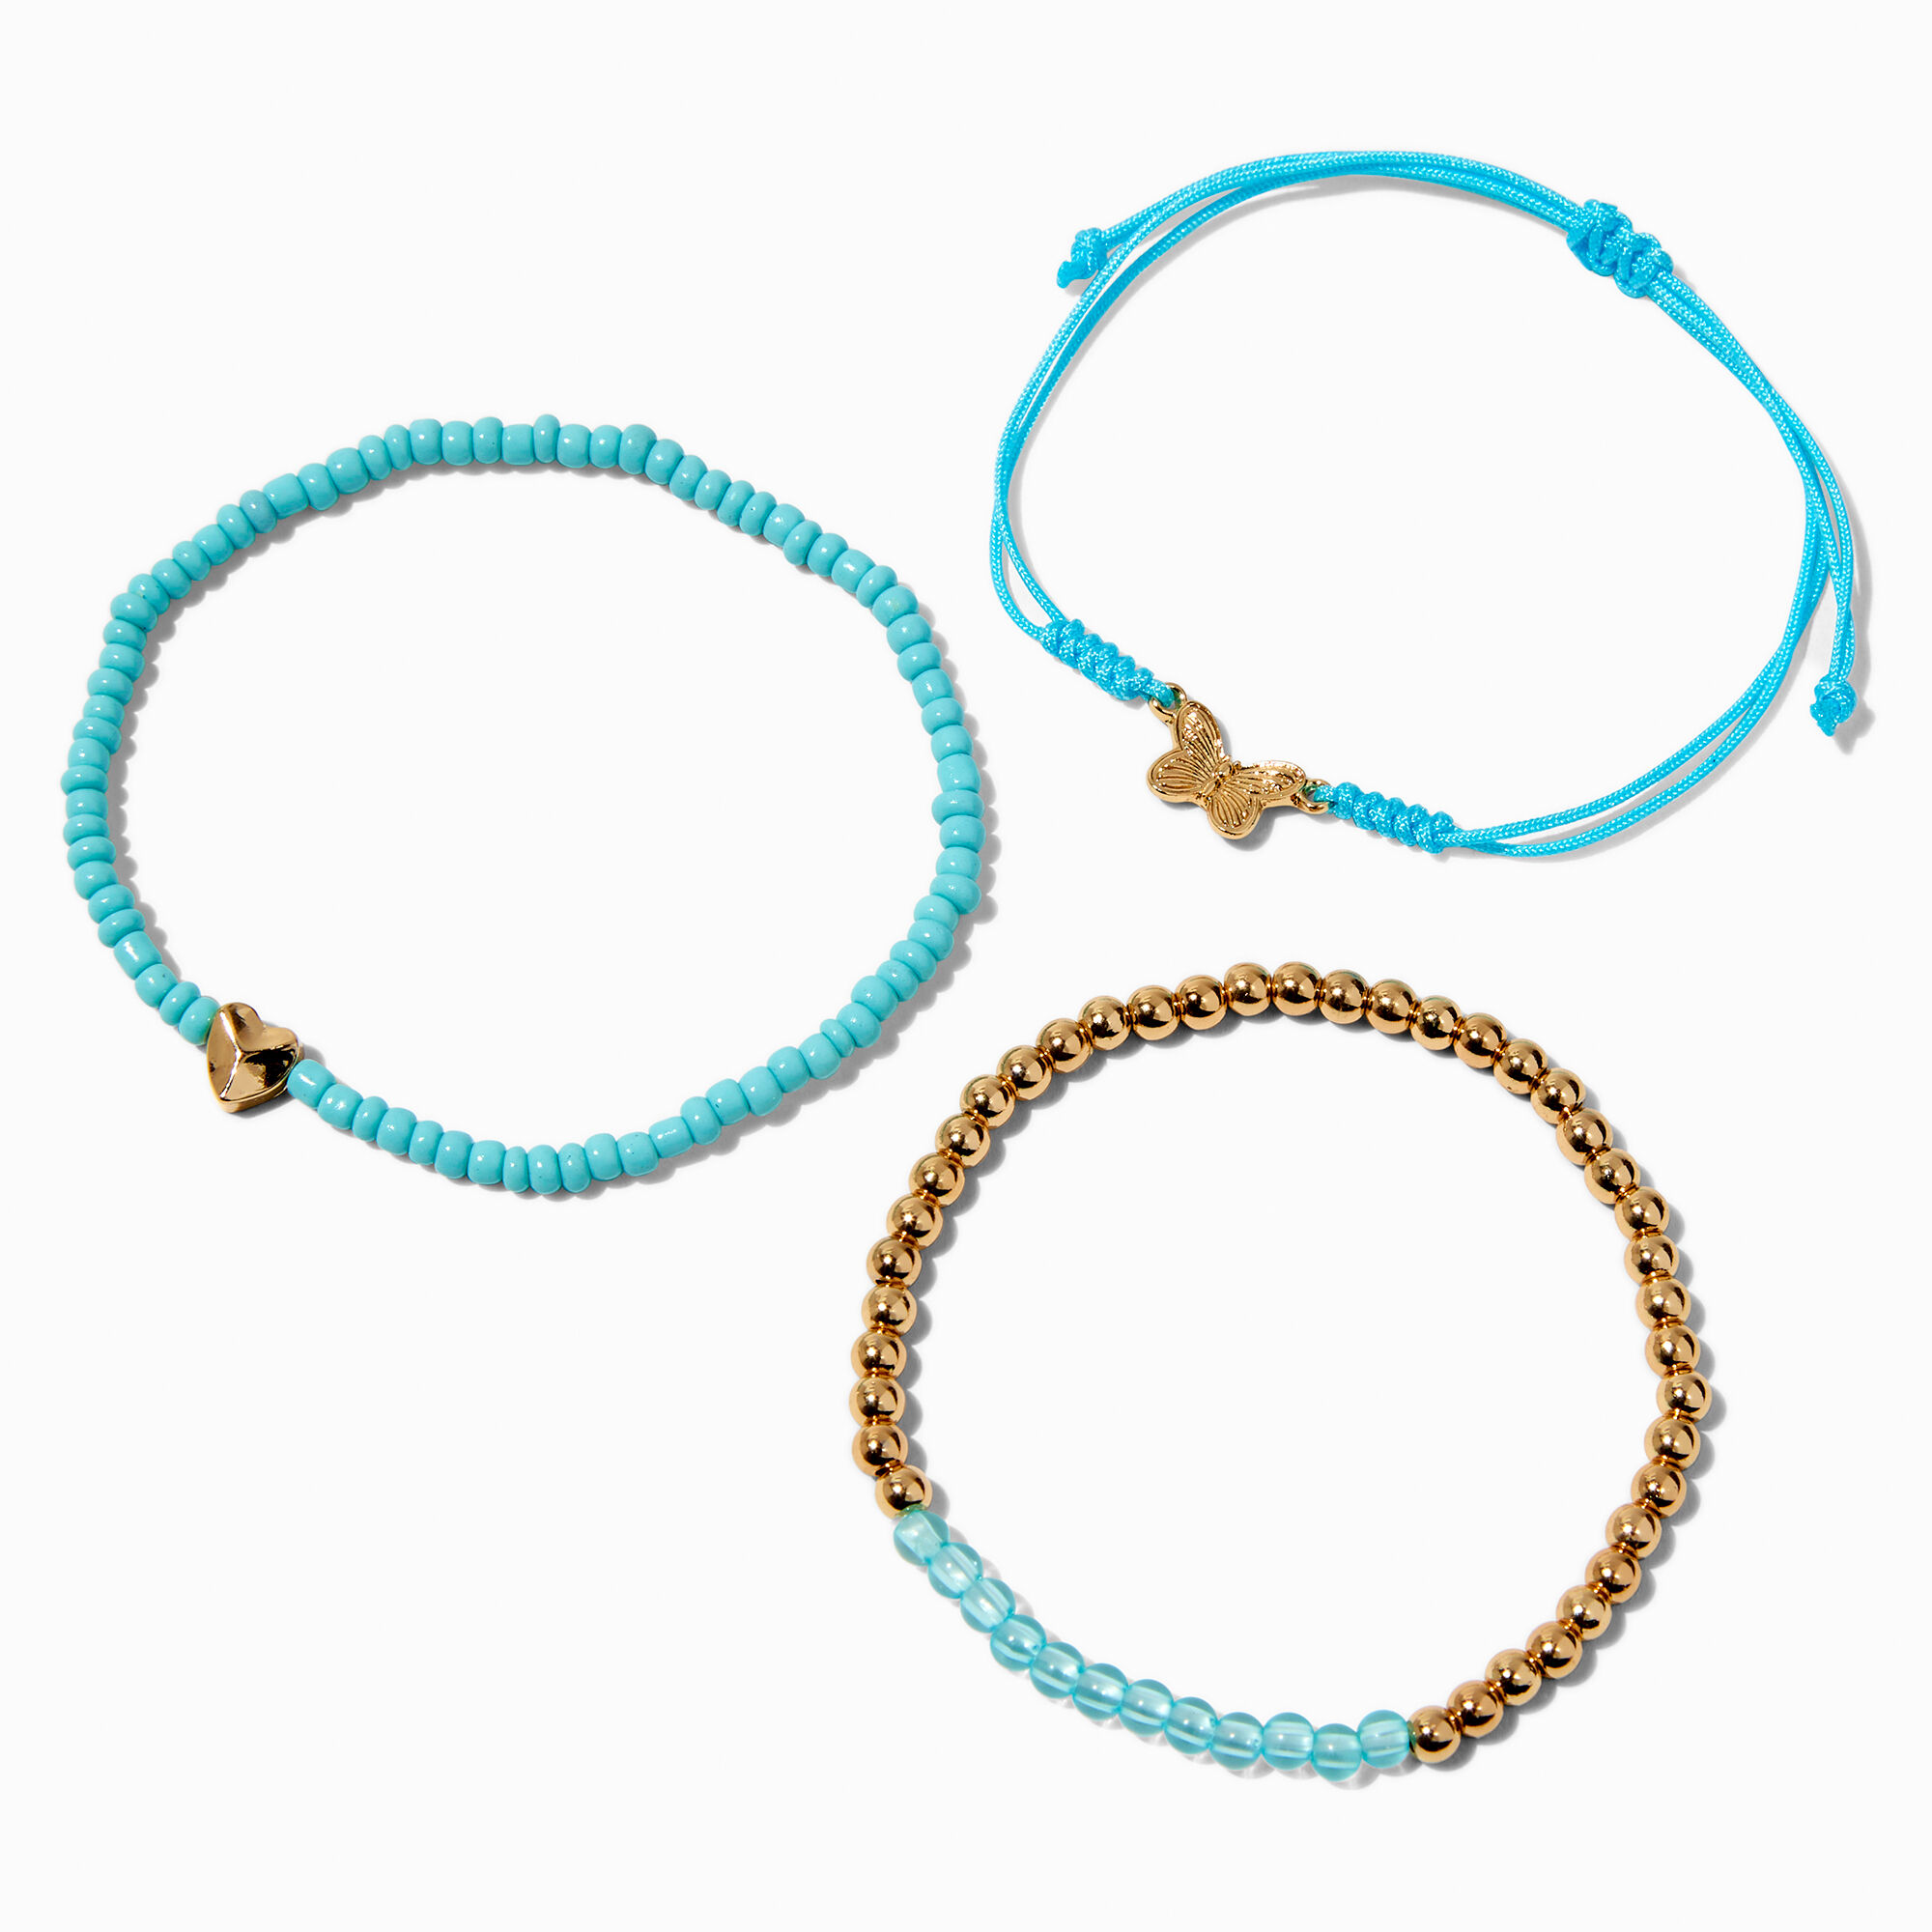 View Claires Butterfly Heart Beaded Bracelet Set 3 Pack Turquoise information